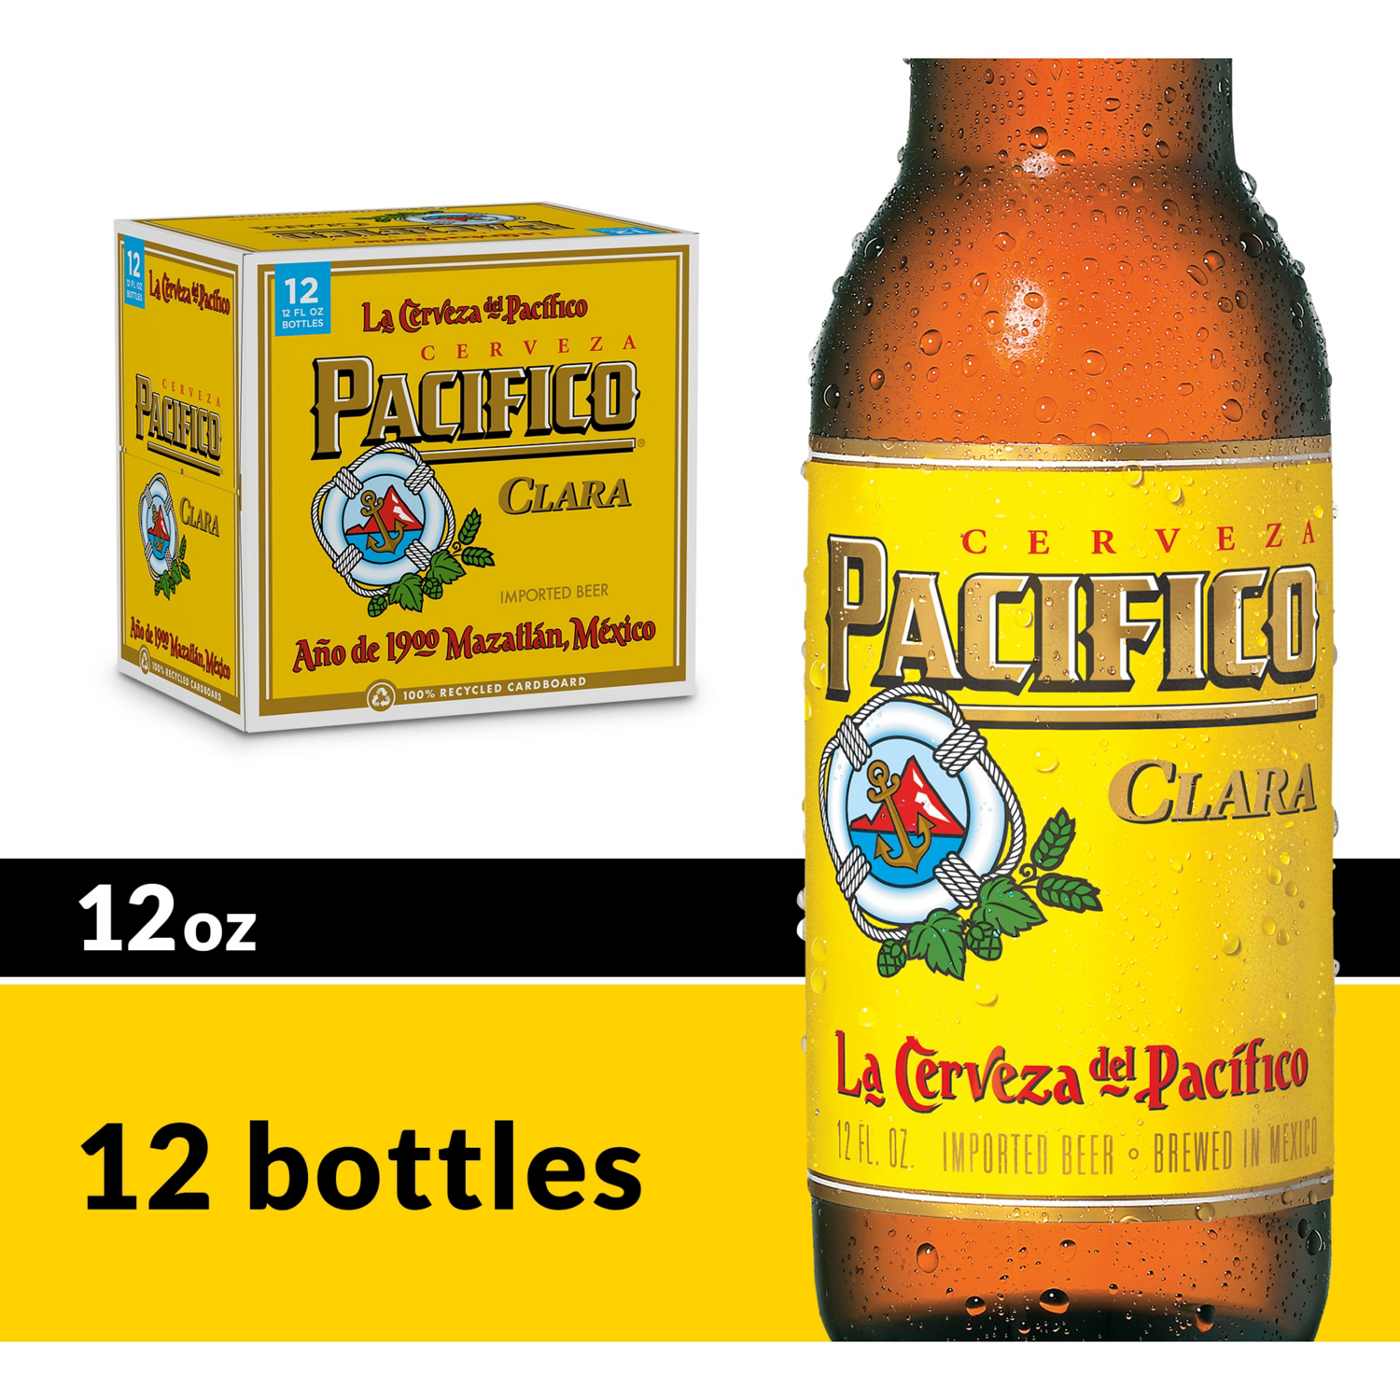 Pacifico Clara Mexican Lager Import Beer 12 oz Bottles, 12 pk; image 2 of 10